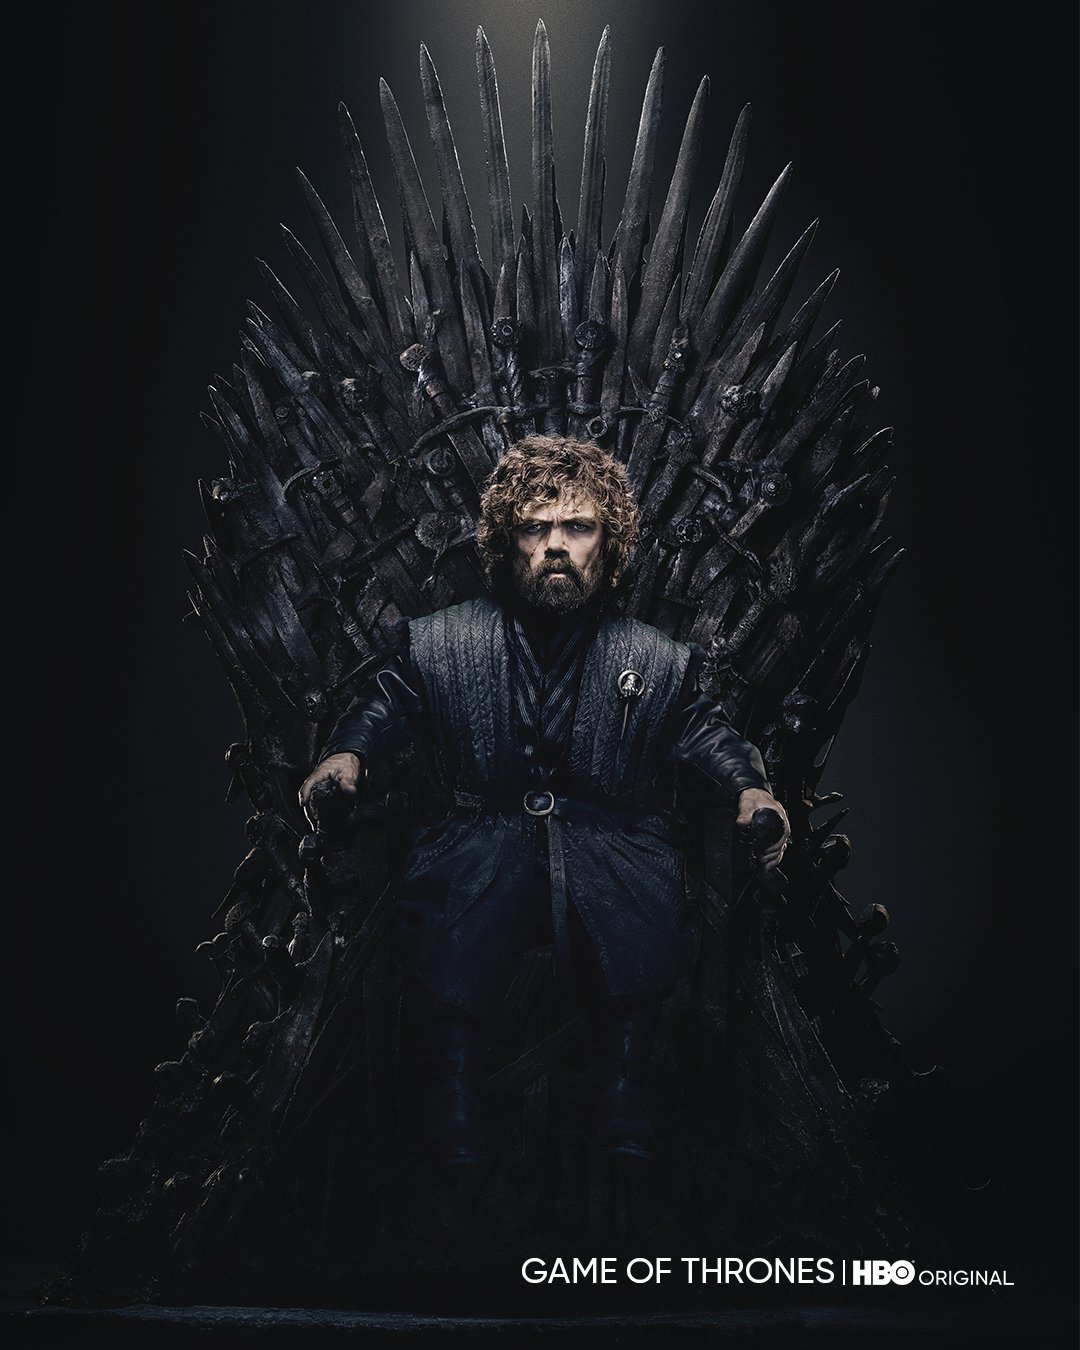 Happy Birthday, Peter Dinklage! 
The Iron Throne suits you well. 